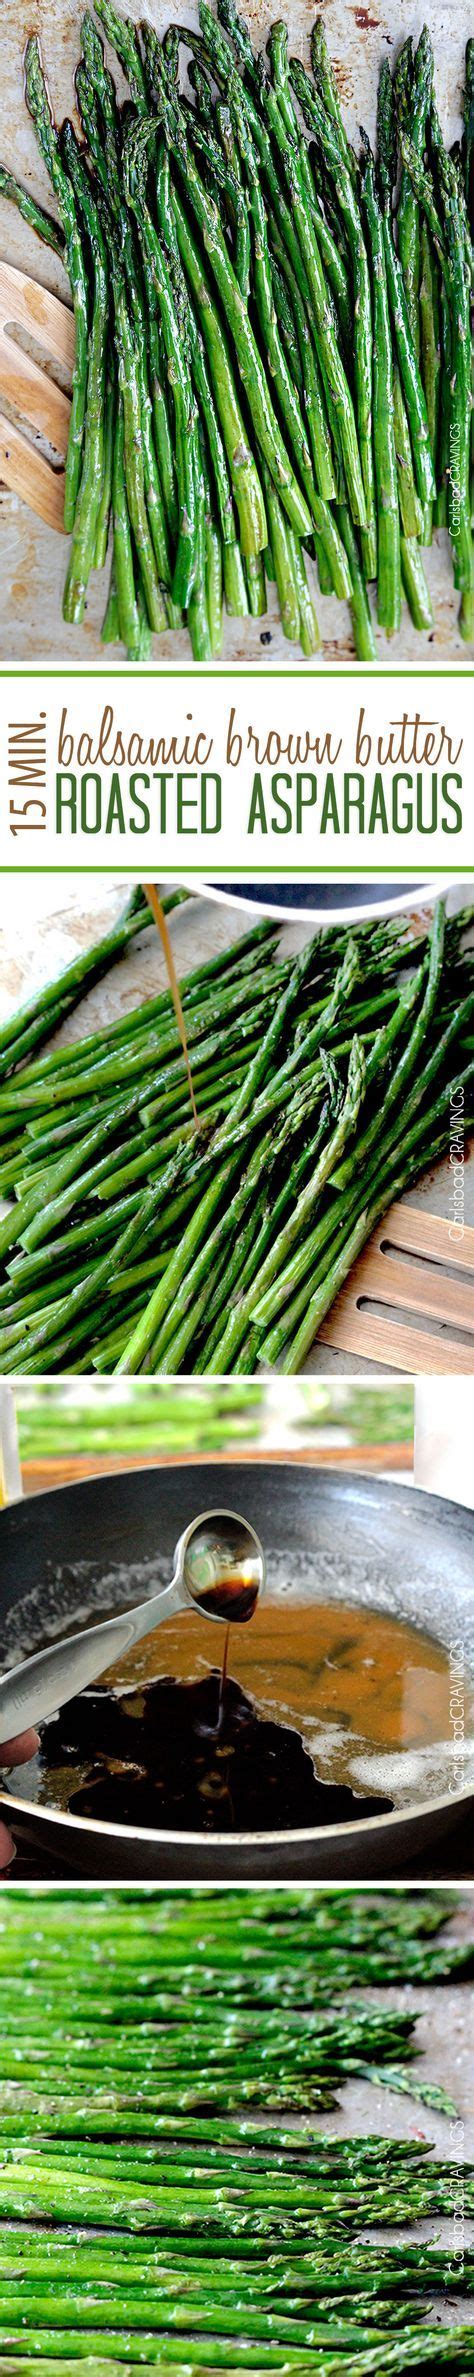 15 Minute Balsamic Brown Butter Roasted Asparagus Roasted Asparagus